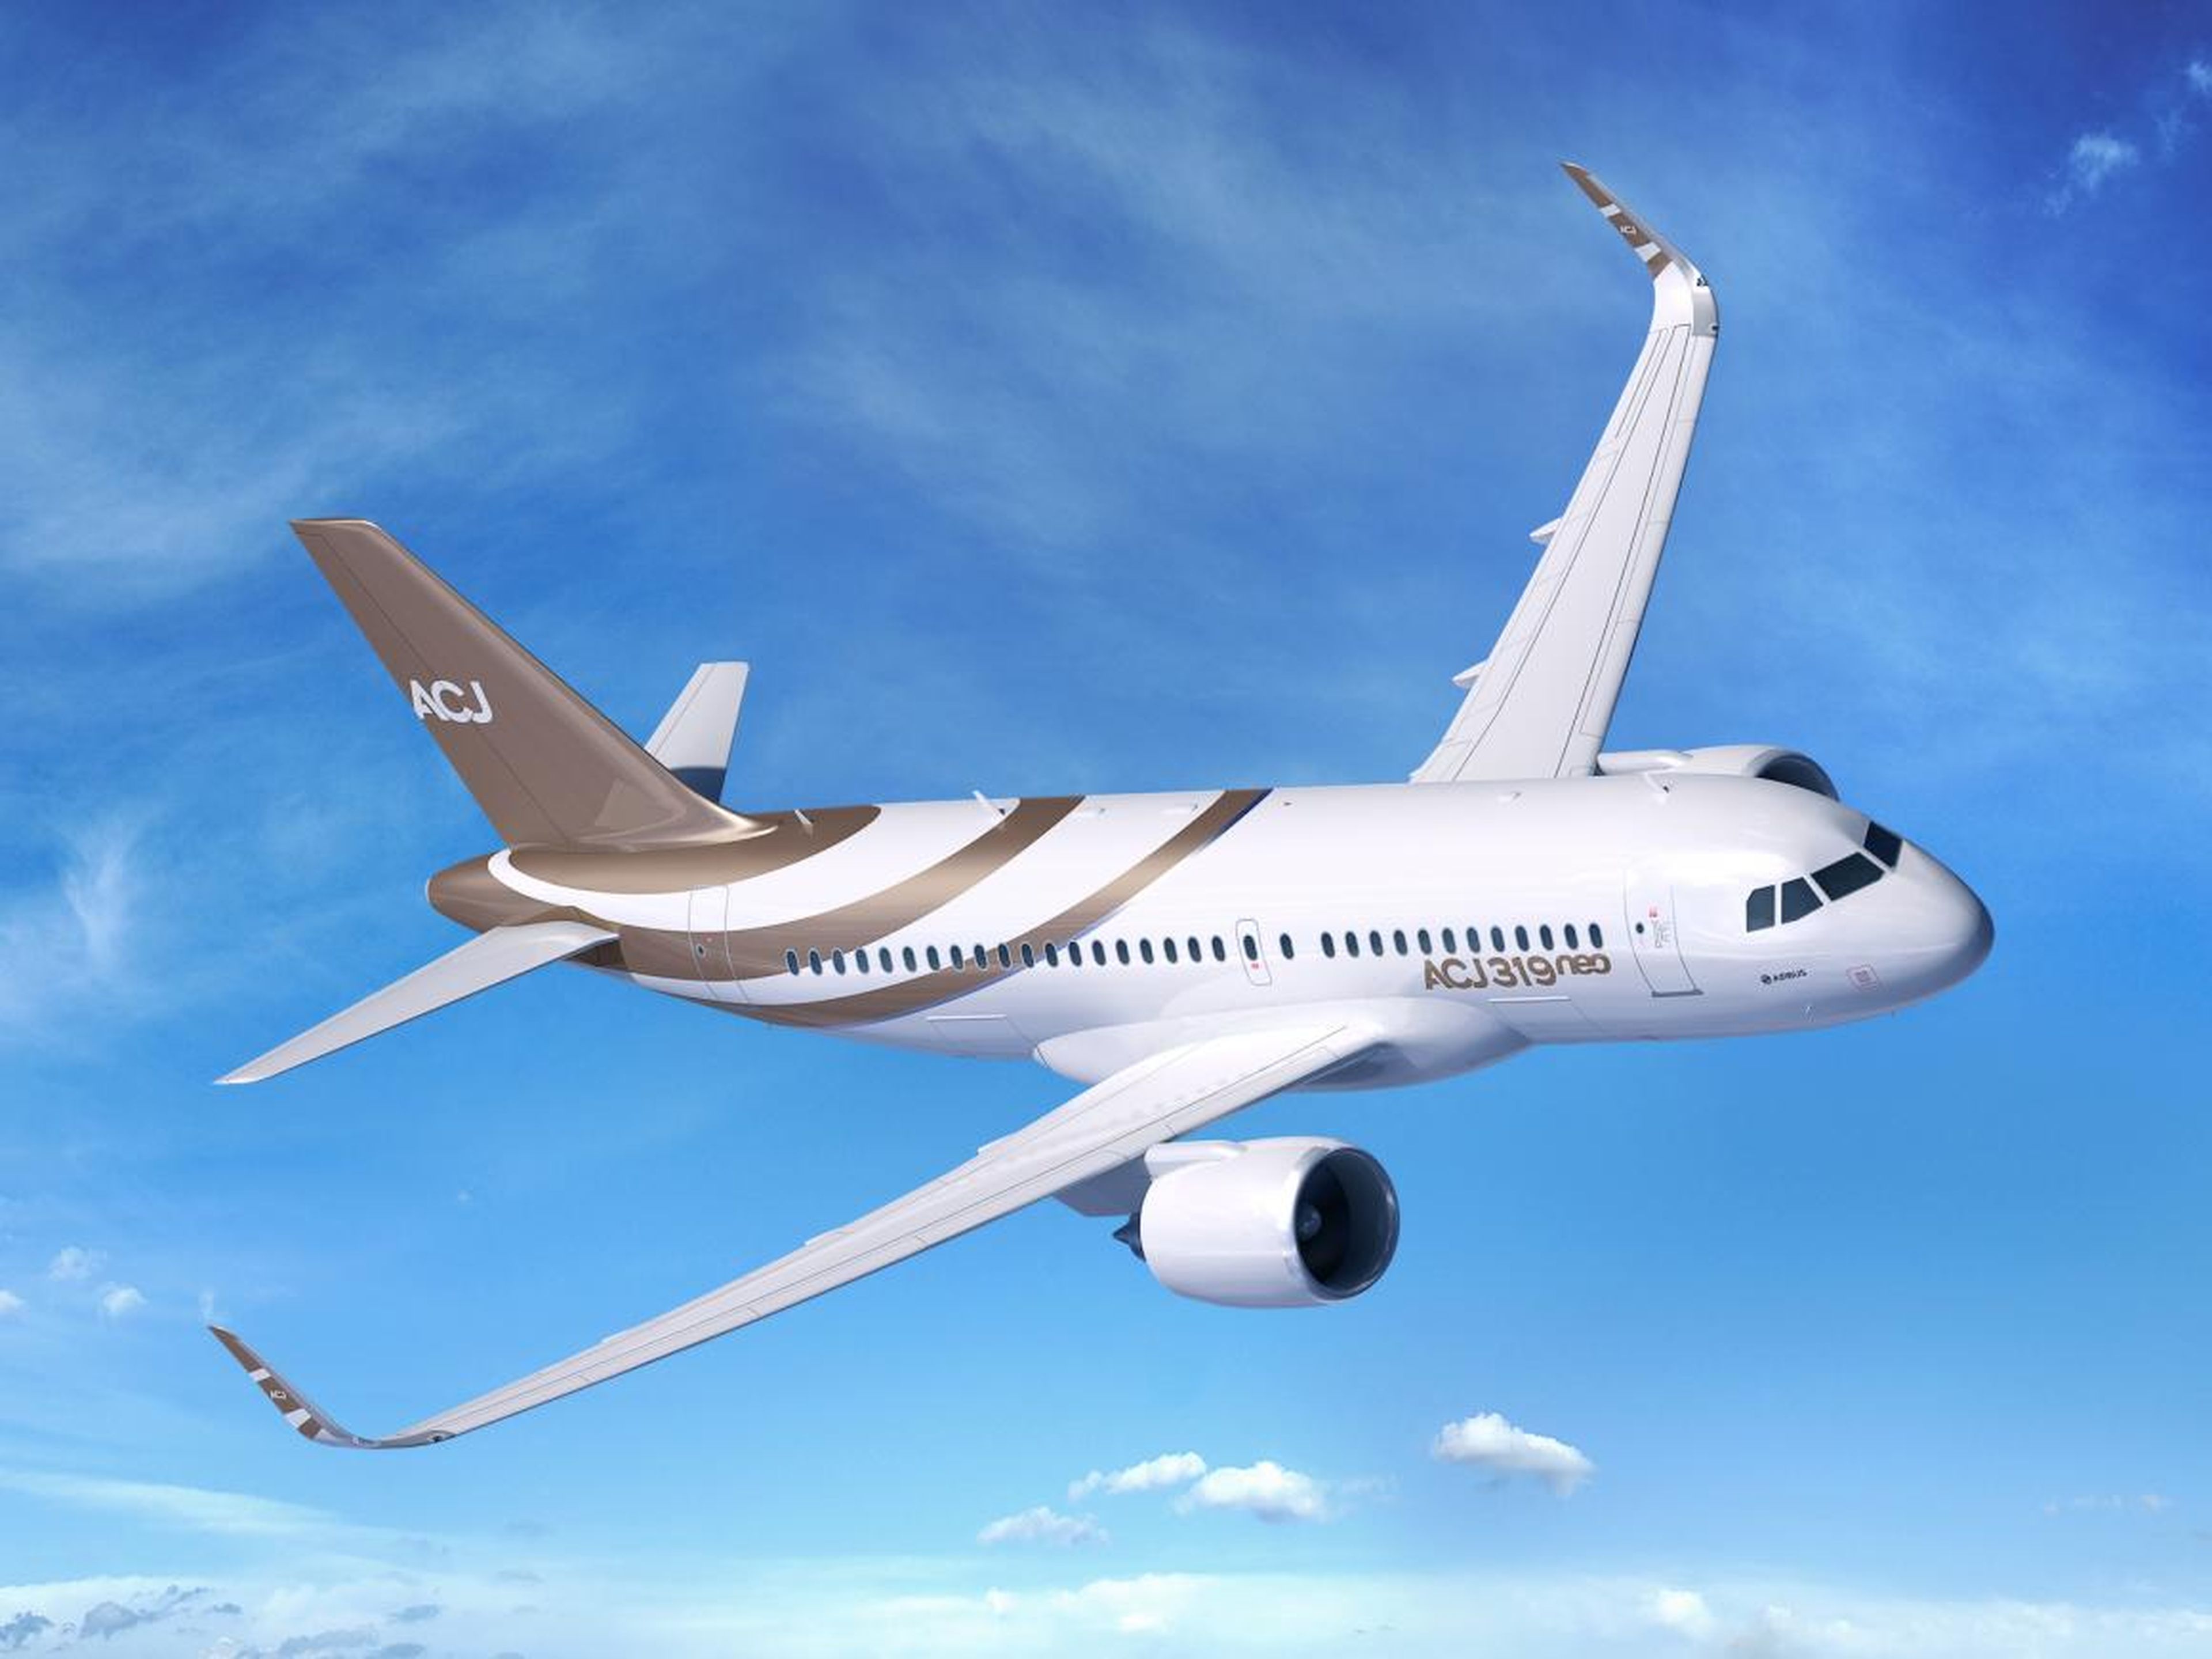 6. Airbus ACJ319Neo: The ACJ, or Airbus Corporate Jet, is the business version of the Airbus A319neo airliner.